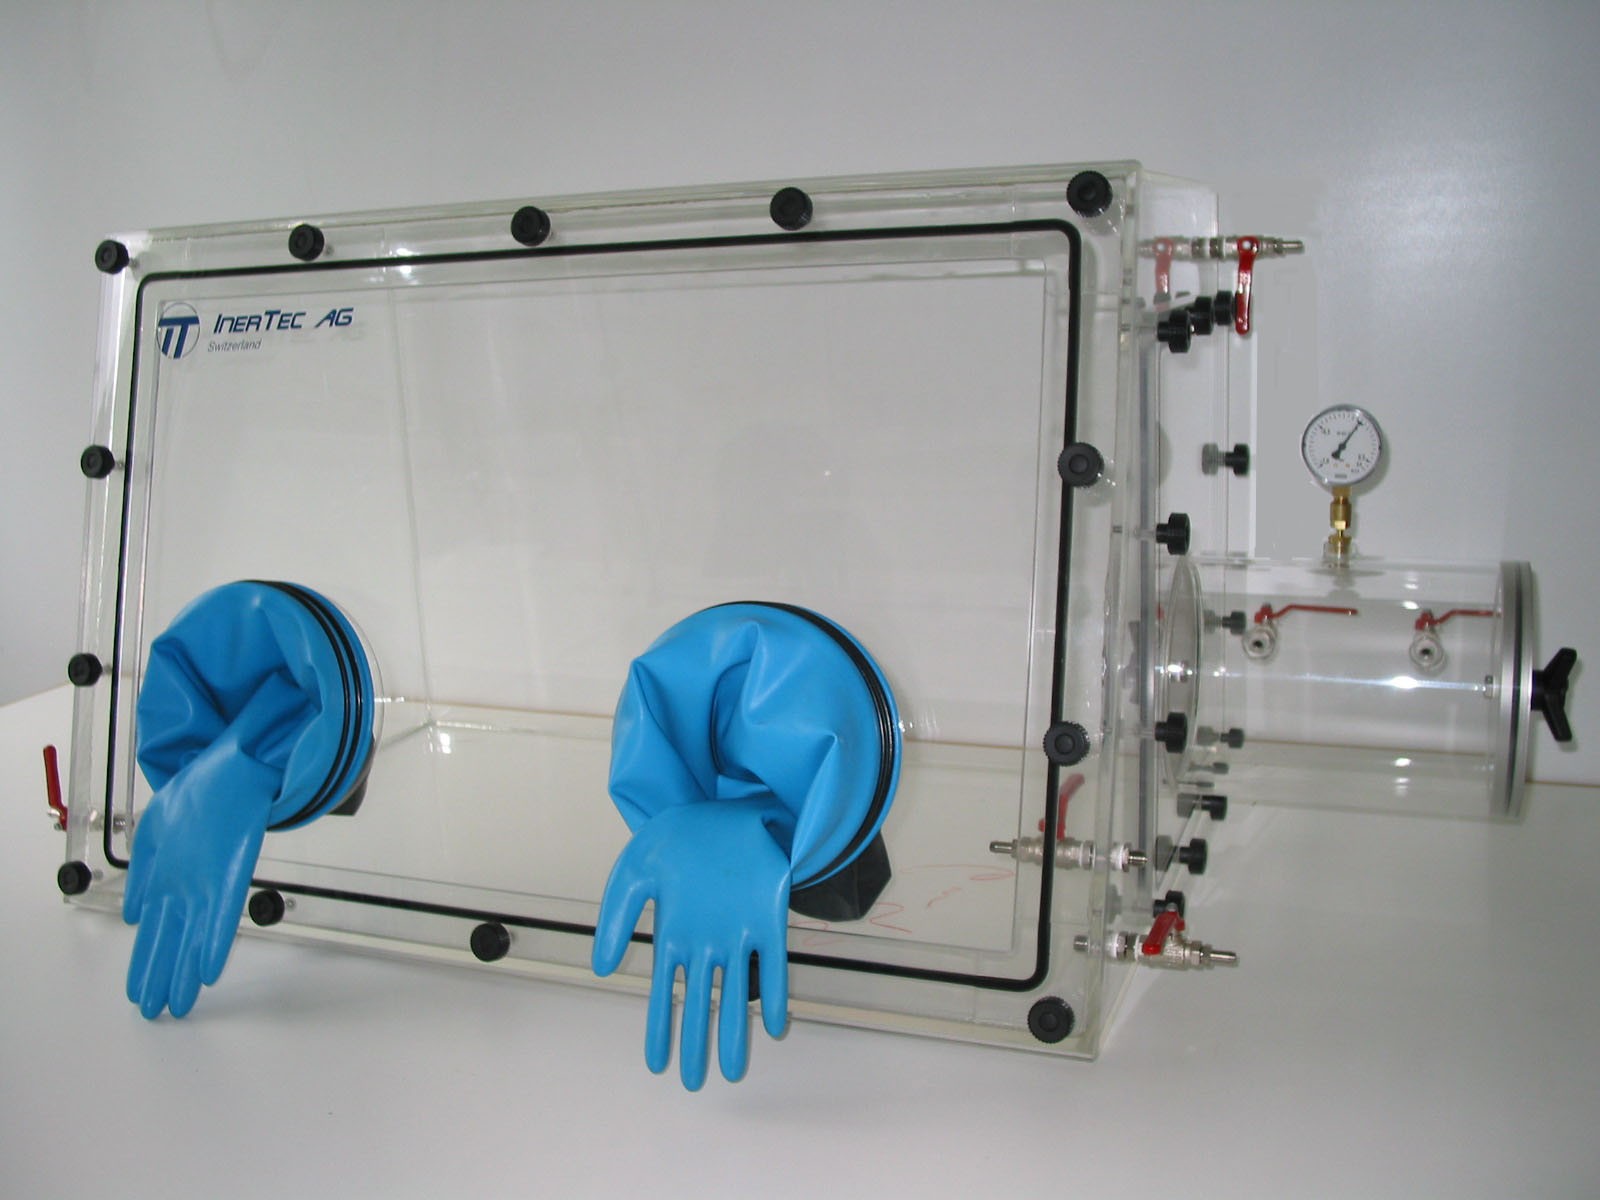 Glovebox made of acrylic&gt; Gas filling: automatic flushing with pressure control, front design: swivels upwards, side design: round vacuum lock, control: humidity controller with data logger